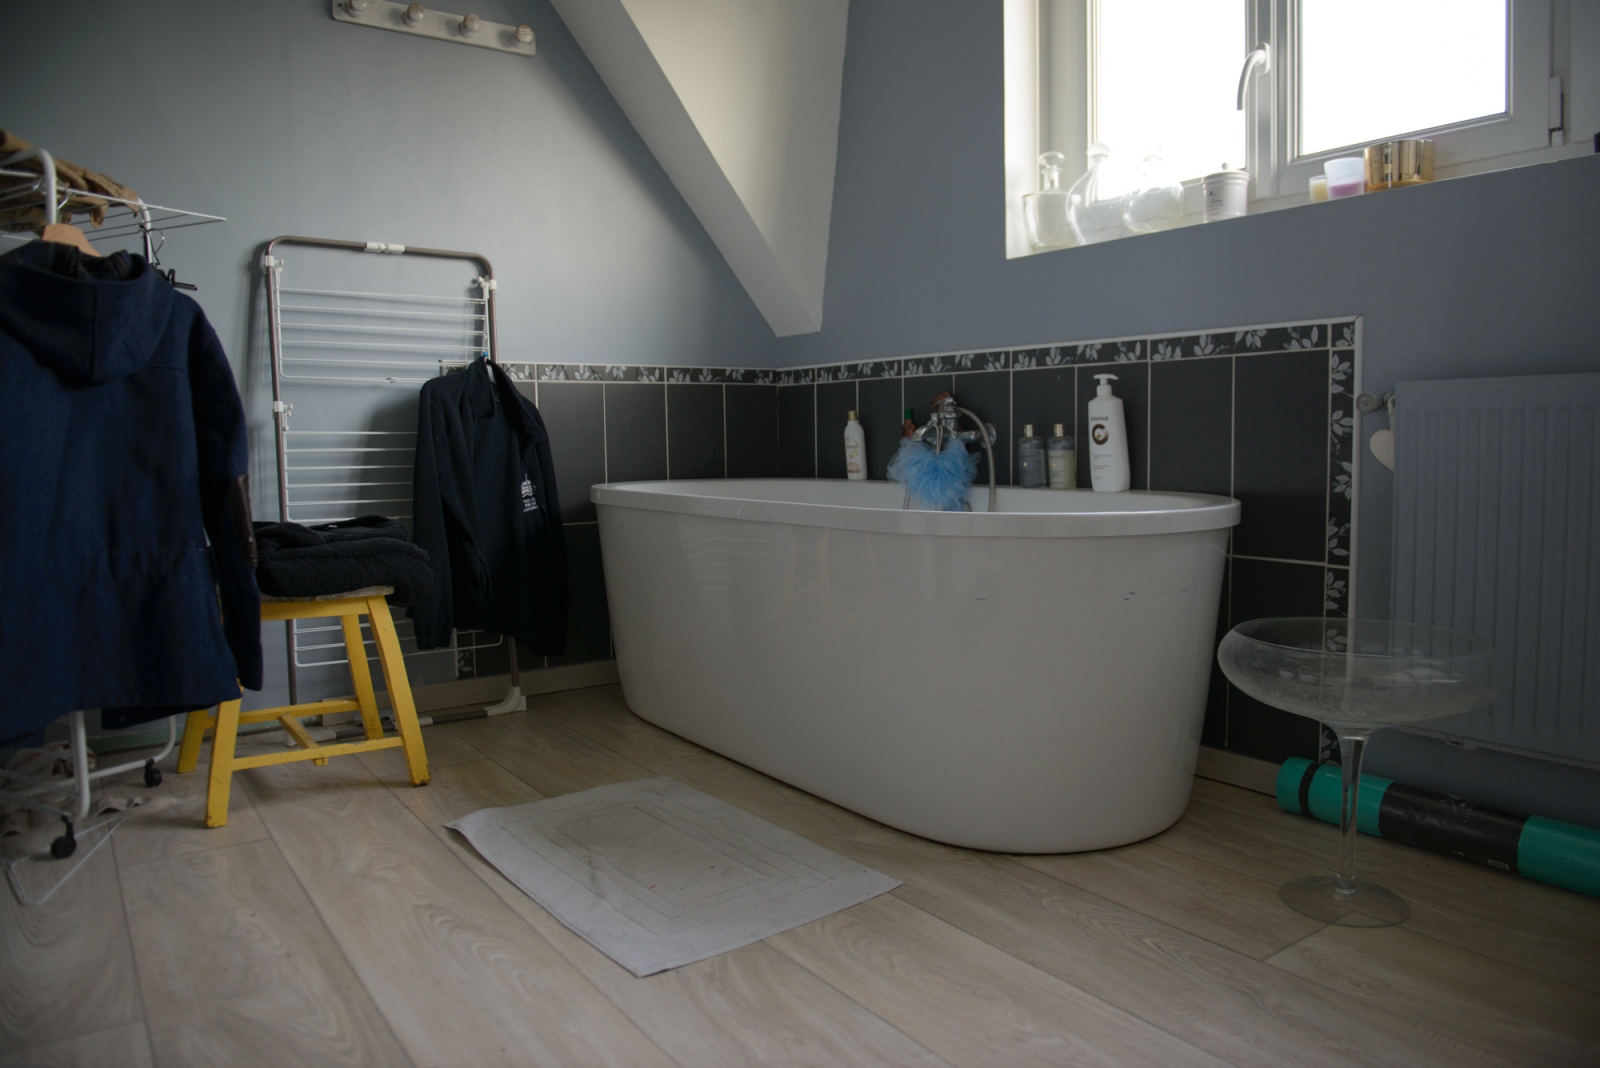 Les Solidaires - EN// The owner of this bathroom has been hosting refugees...